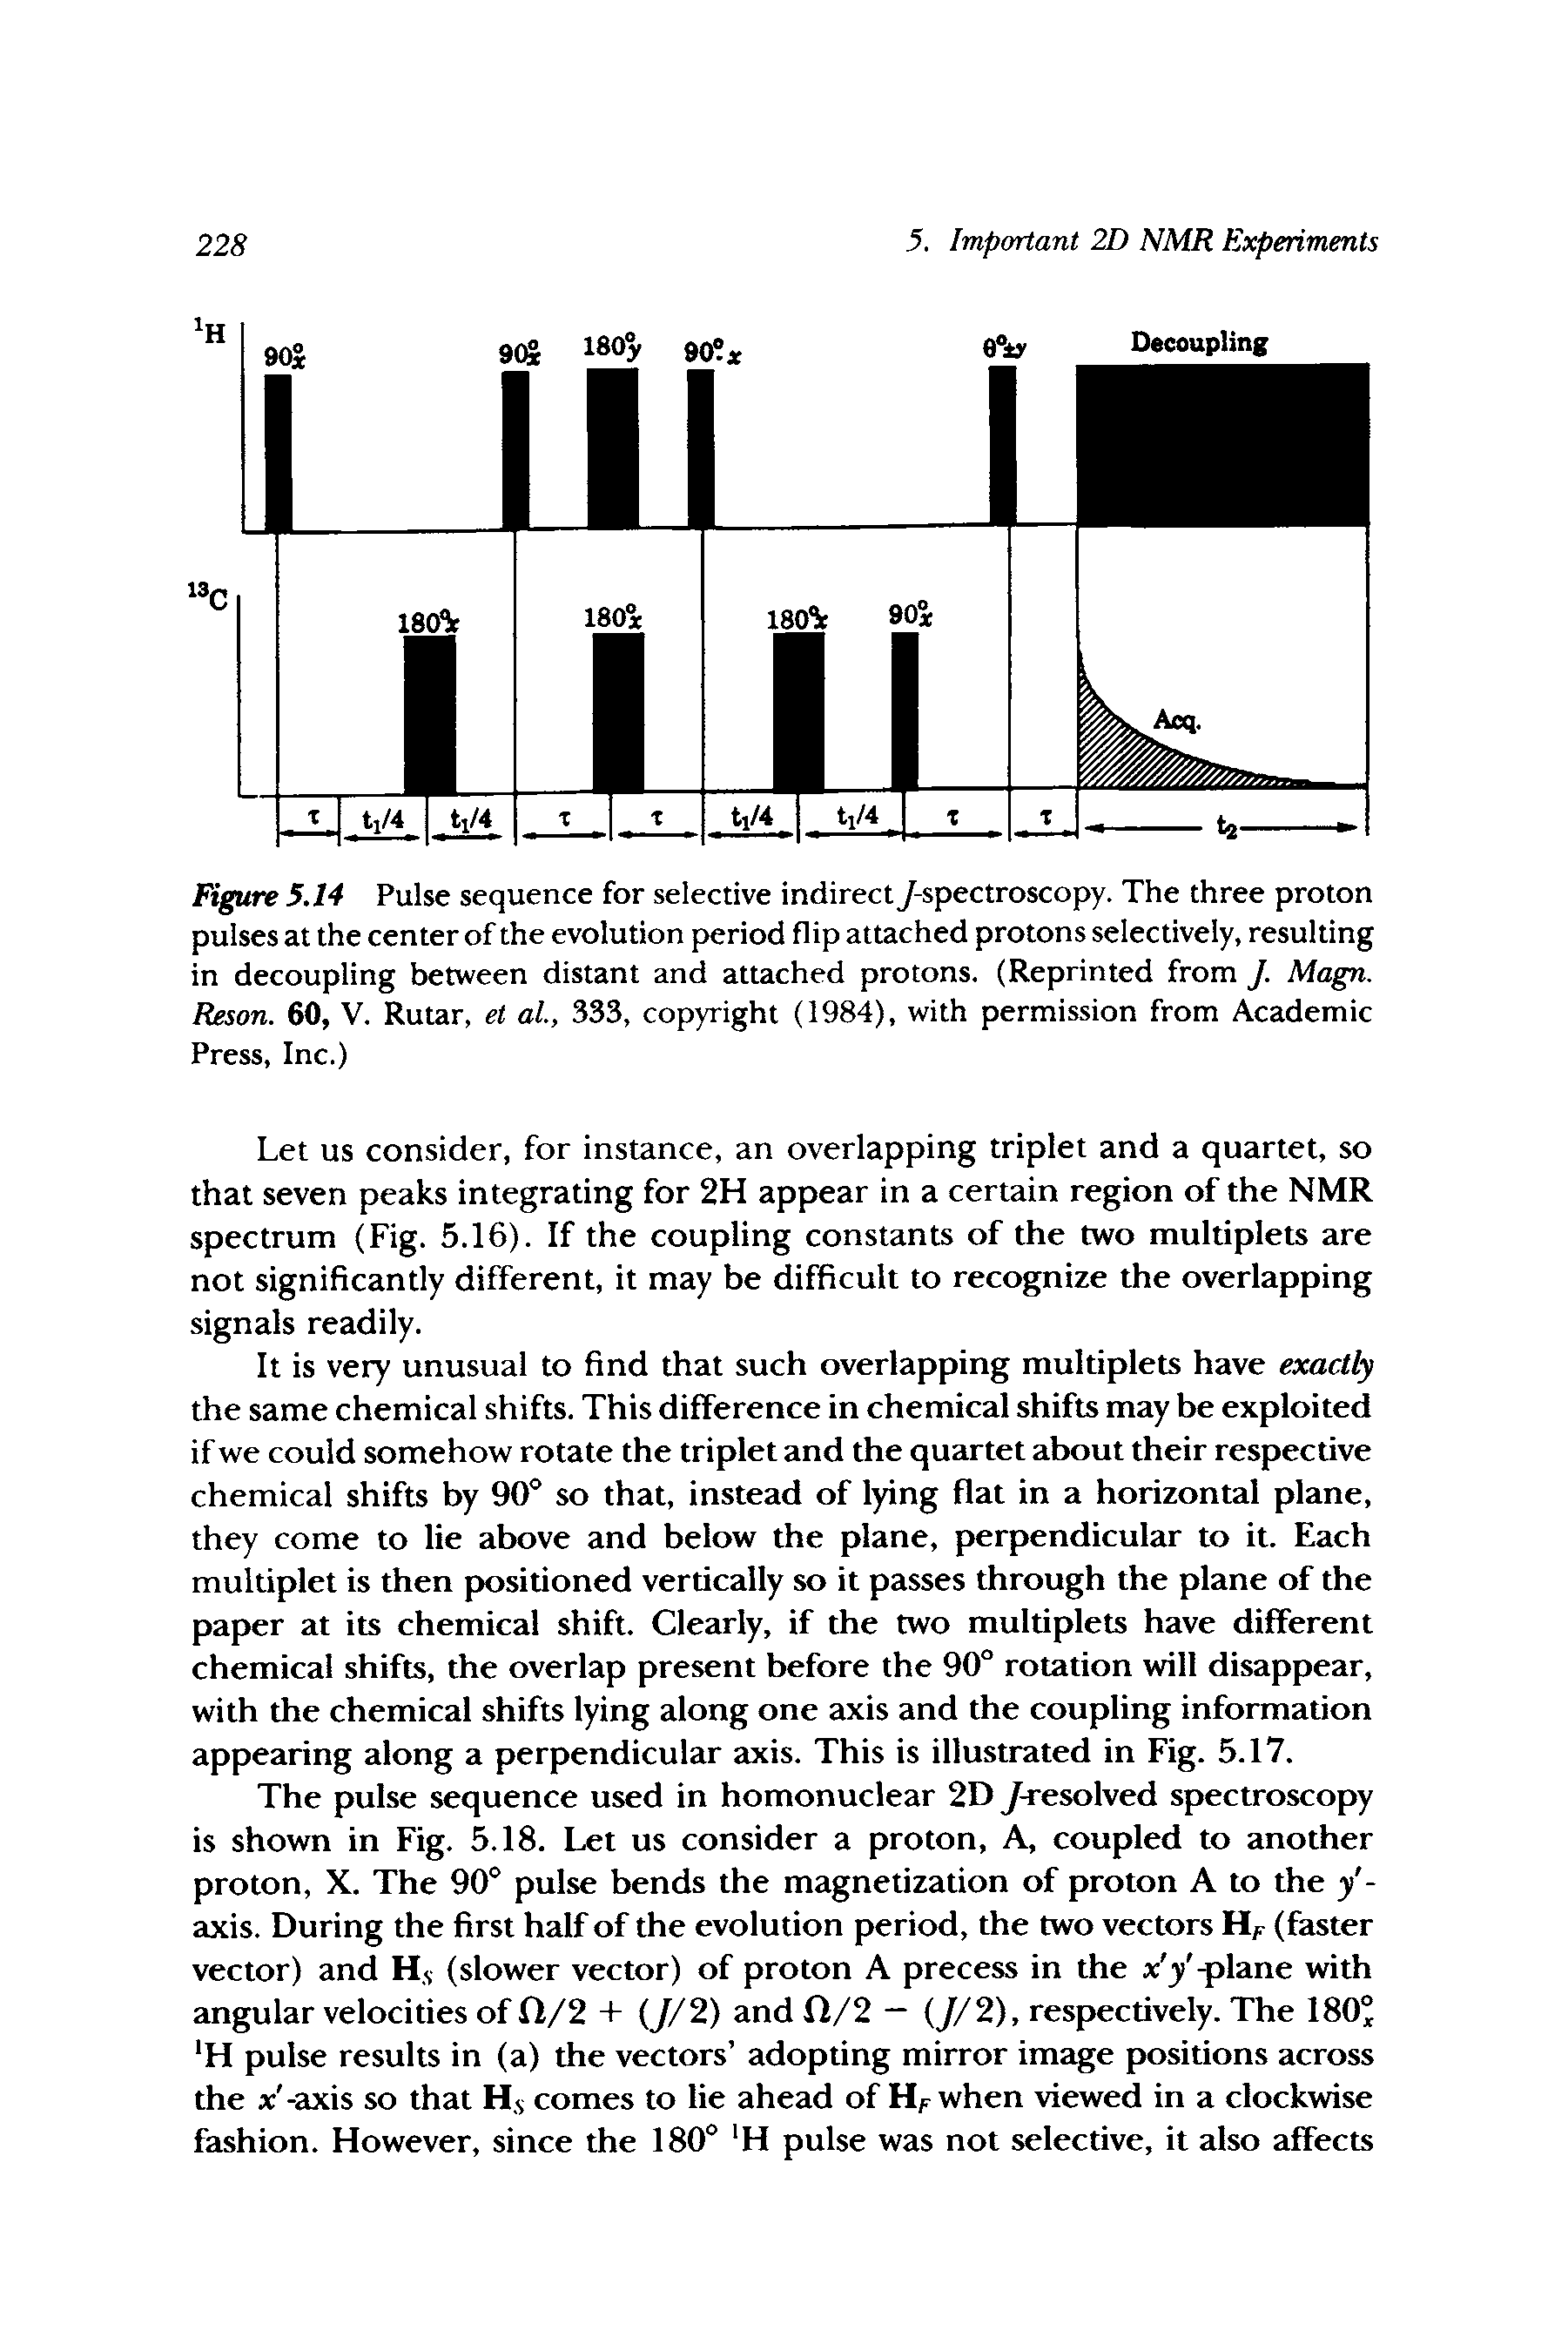 Figure 5.14 Pulse sequence for selective indirecty-spectroscopy. The three proton pulses at the center of the evolution period flip attached protons selectively, resulting in decoupling between distant and attached protons. (Reprinted from J. Magn. Reson. 60, V. Rutar, et ai, 333, copyright (1984), with permission from Academic Press, Inc.)...